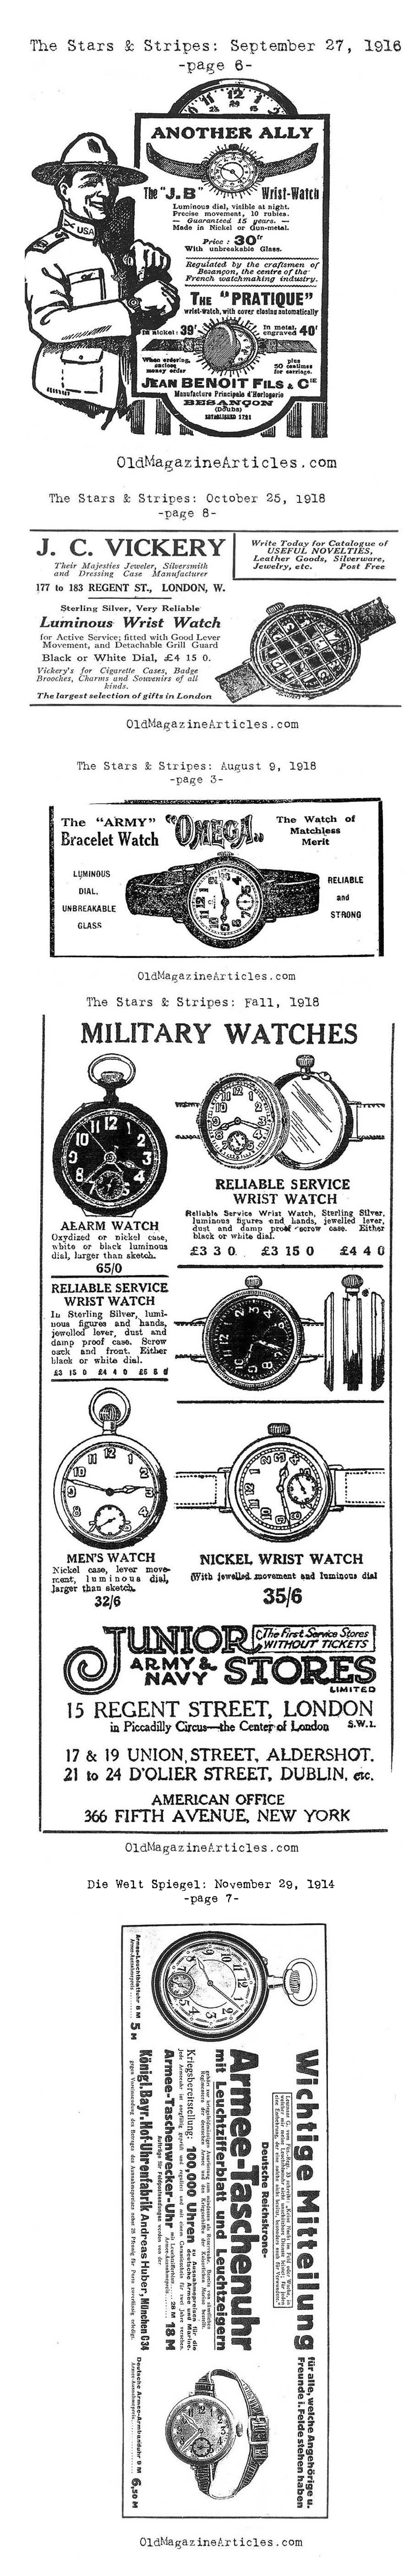 Advertisements: Five Ads for Military Wrist Watches ( S & S, 1918 and Die Welt Spiegel, 1914)